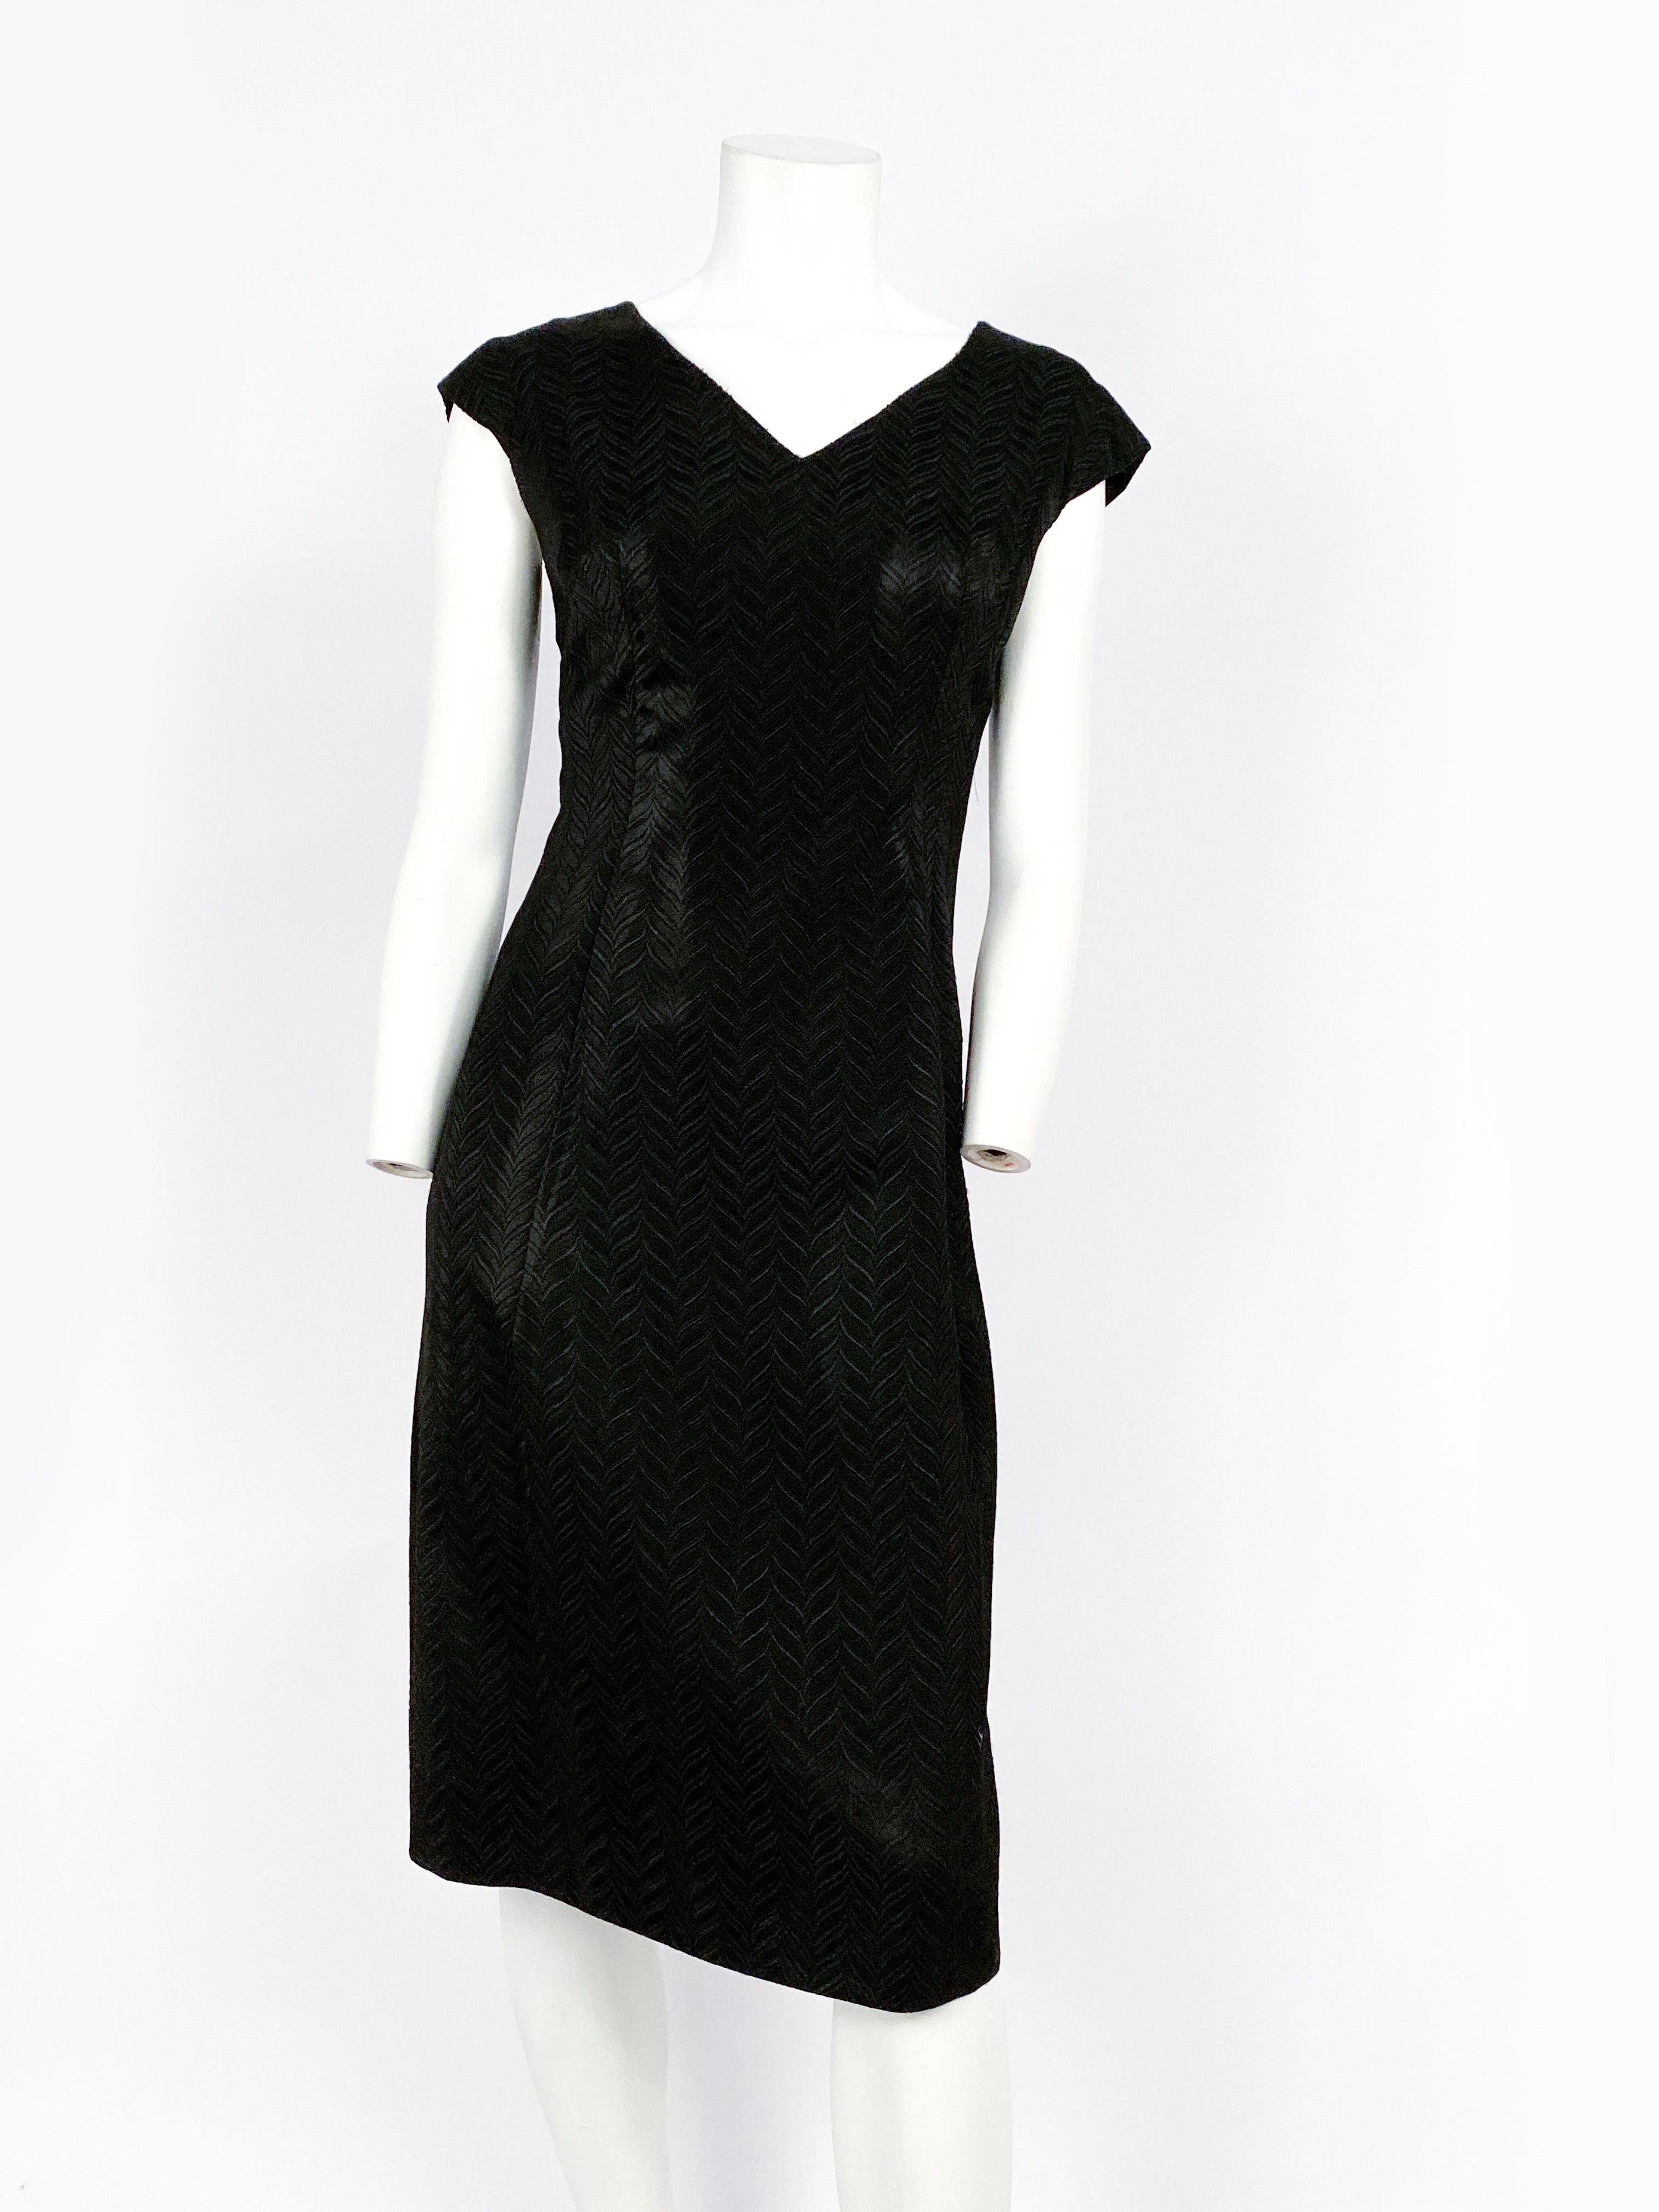 1950s Black Jacquard Dress with Matching Mink-collared Jacket For Sale 3